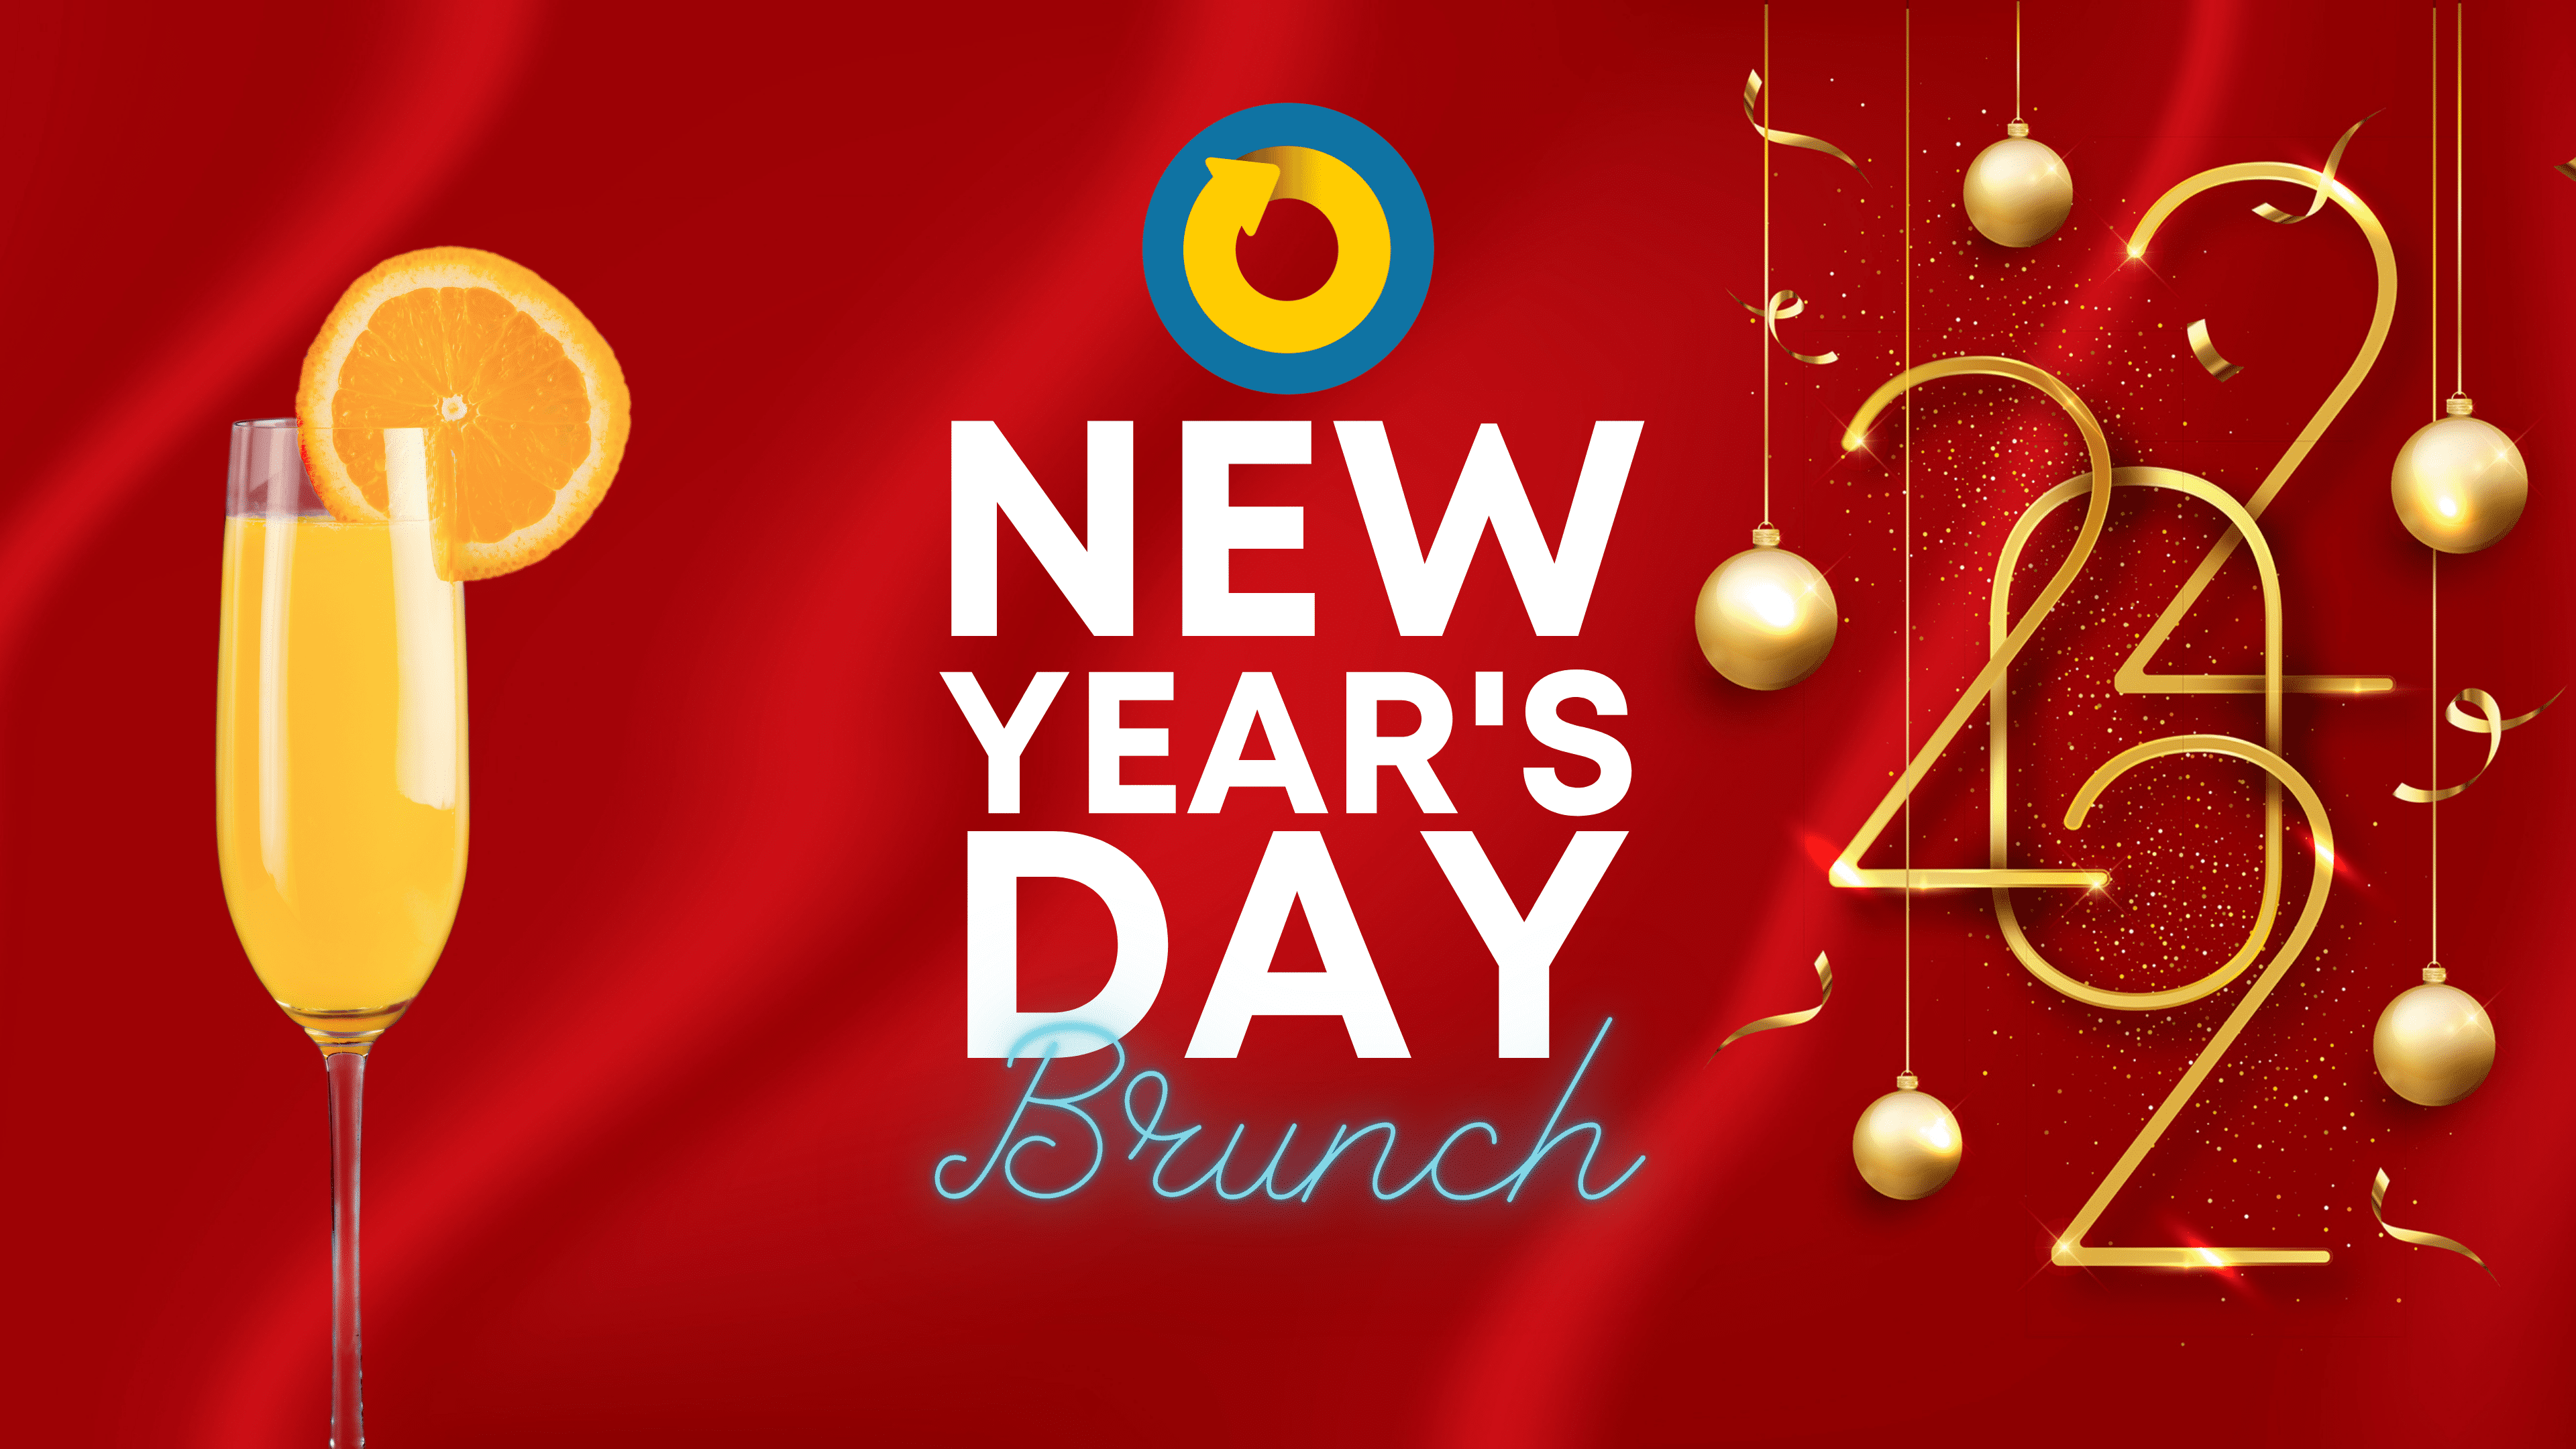 New Year's Day Brunch at On Rotation Brewery & Kitchen